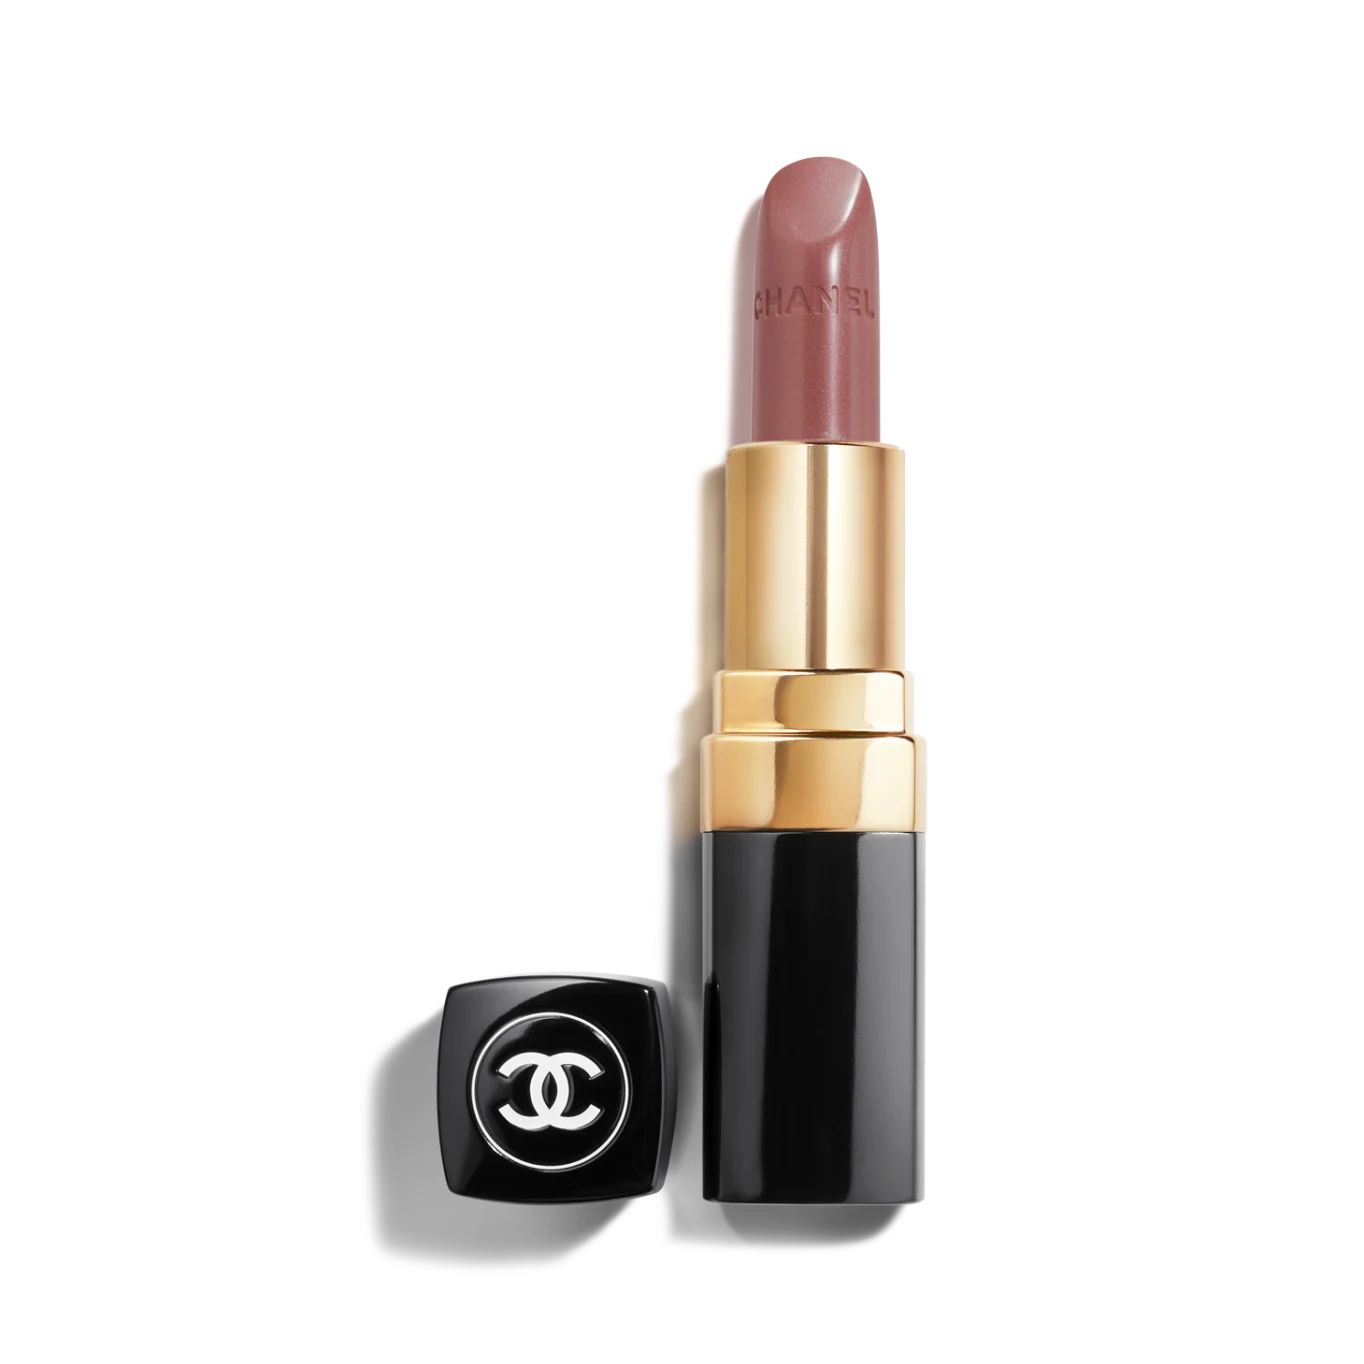 ROUGE COCO Ultra hydrating lip colour 416 - Coco | CHANEL | Chanel, Inc. (US)